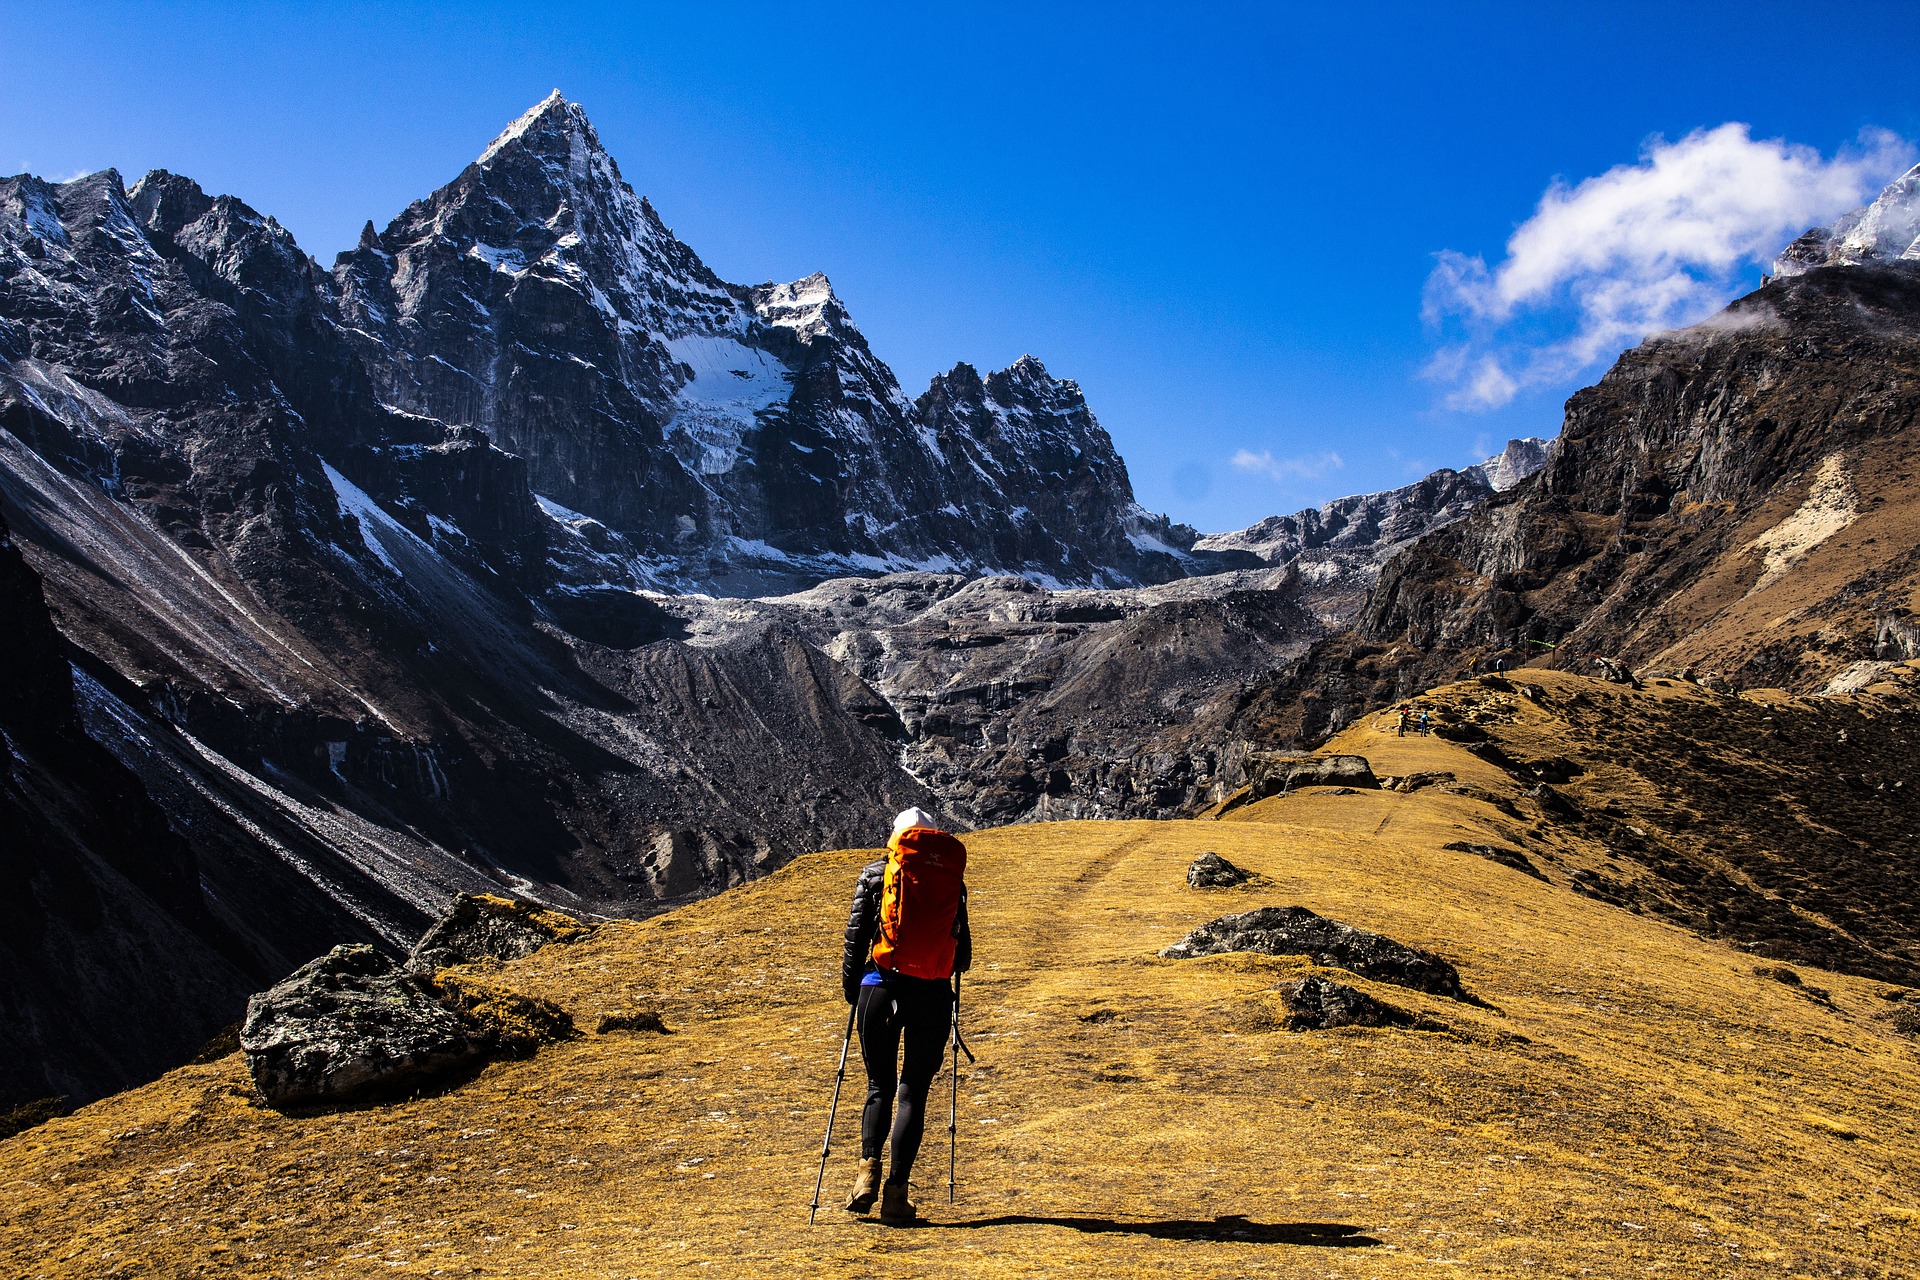 NEPAL PROHIBITS INDEPENDENT MOUNTAINEEERS FROM ACCESS TO NATURE